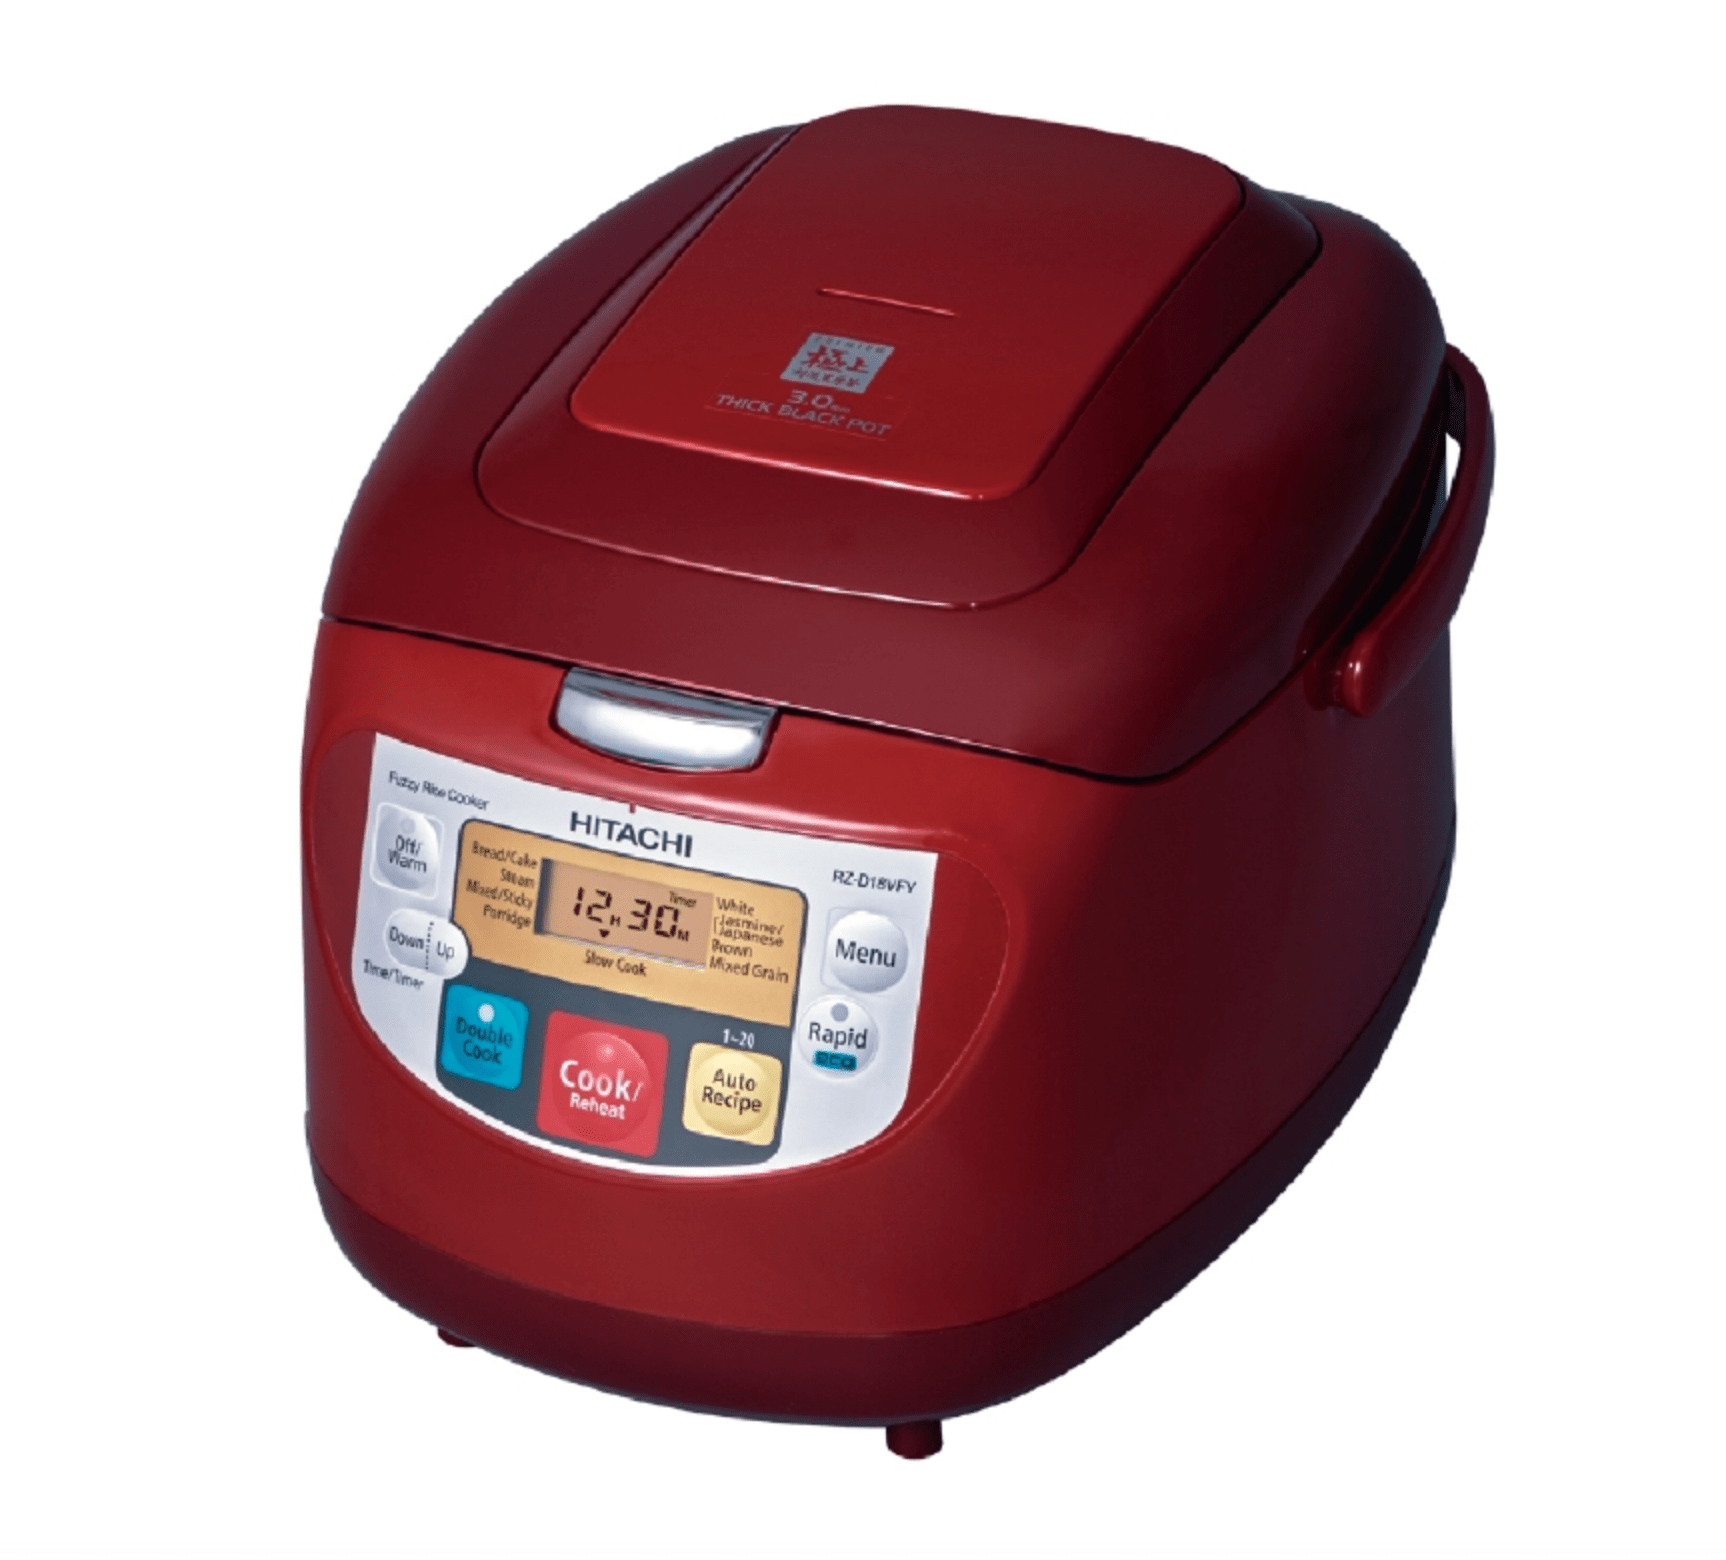 Hitachi 1.8L Microcomputer Rice Cooker RZ-D18VFY malaysia review